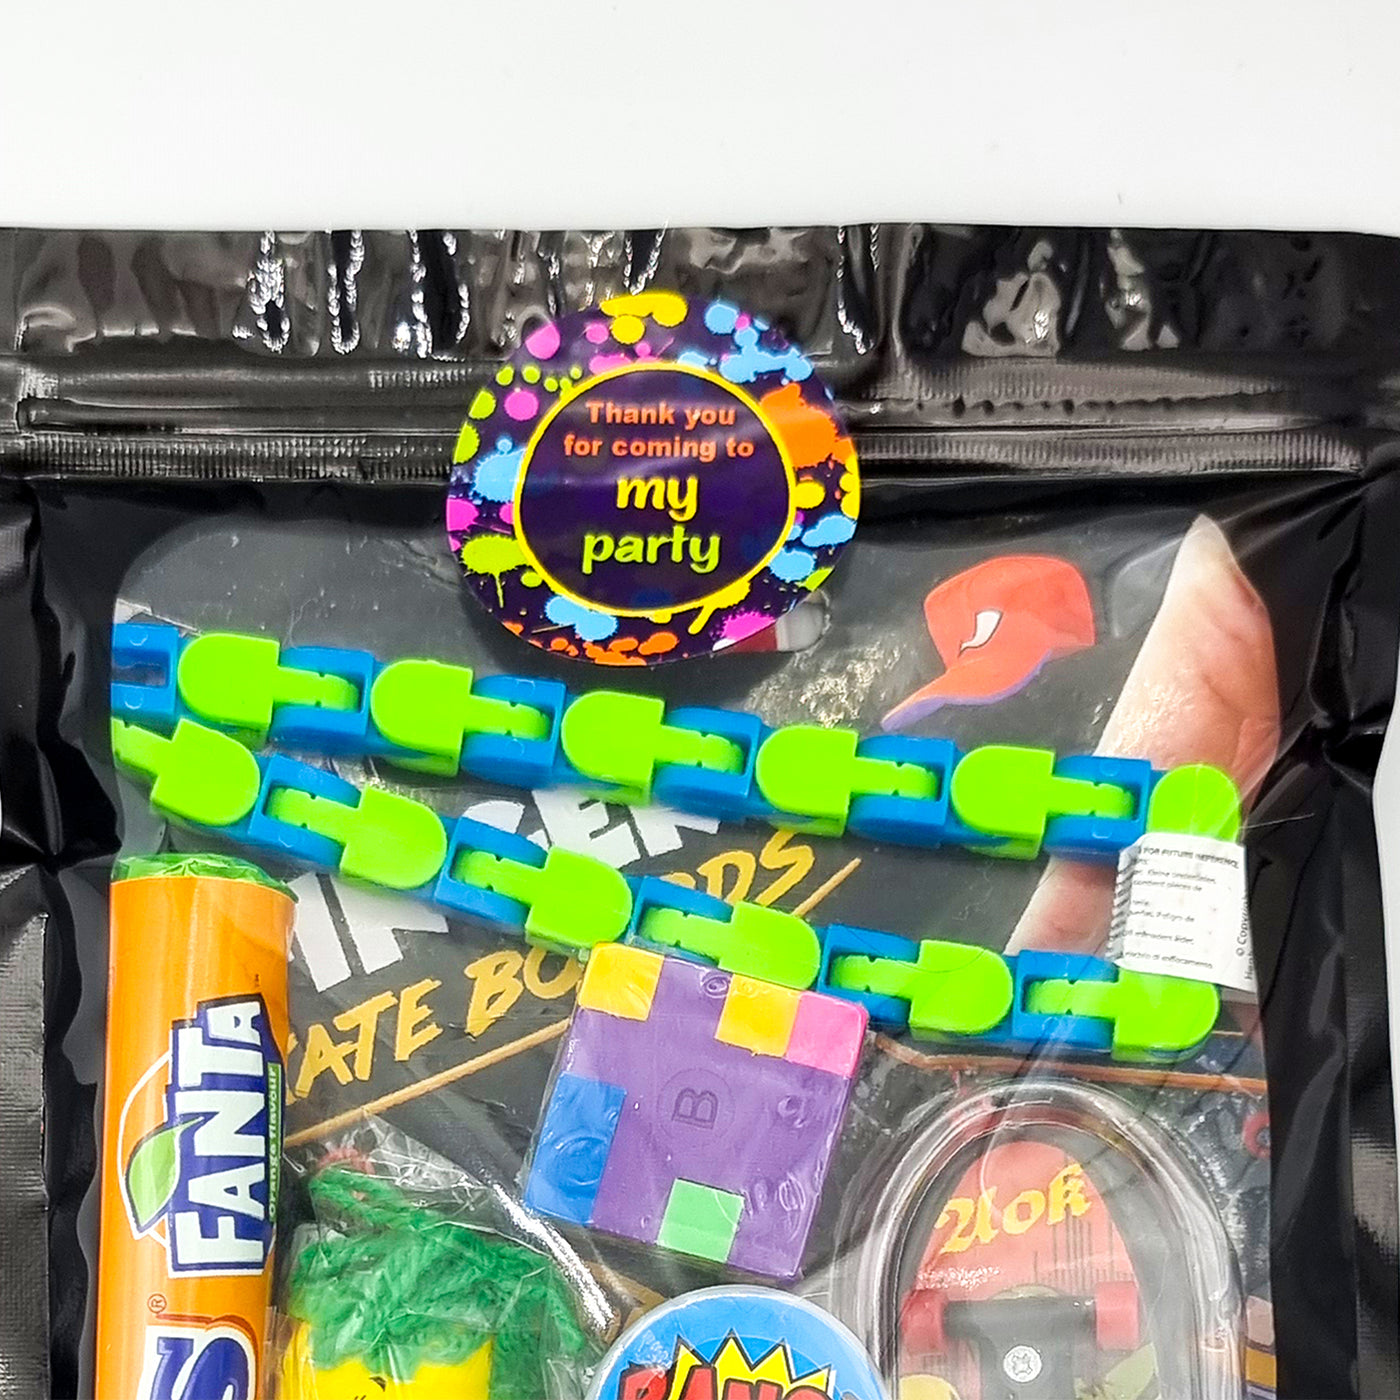 Older Boys Pre Filled Birthday Skateboarding Goody Bags, Party Favours With Toys And Vegan Sweets.